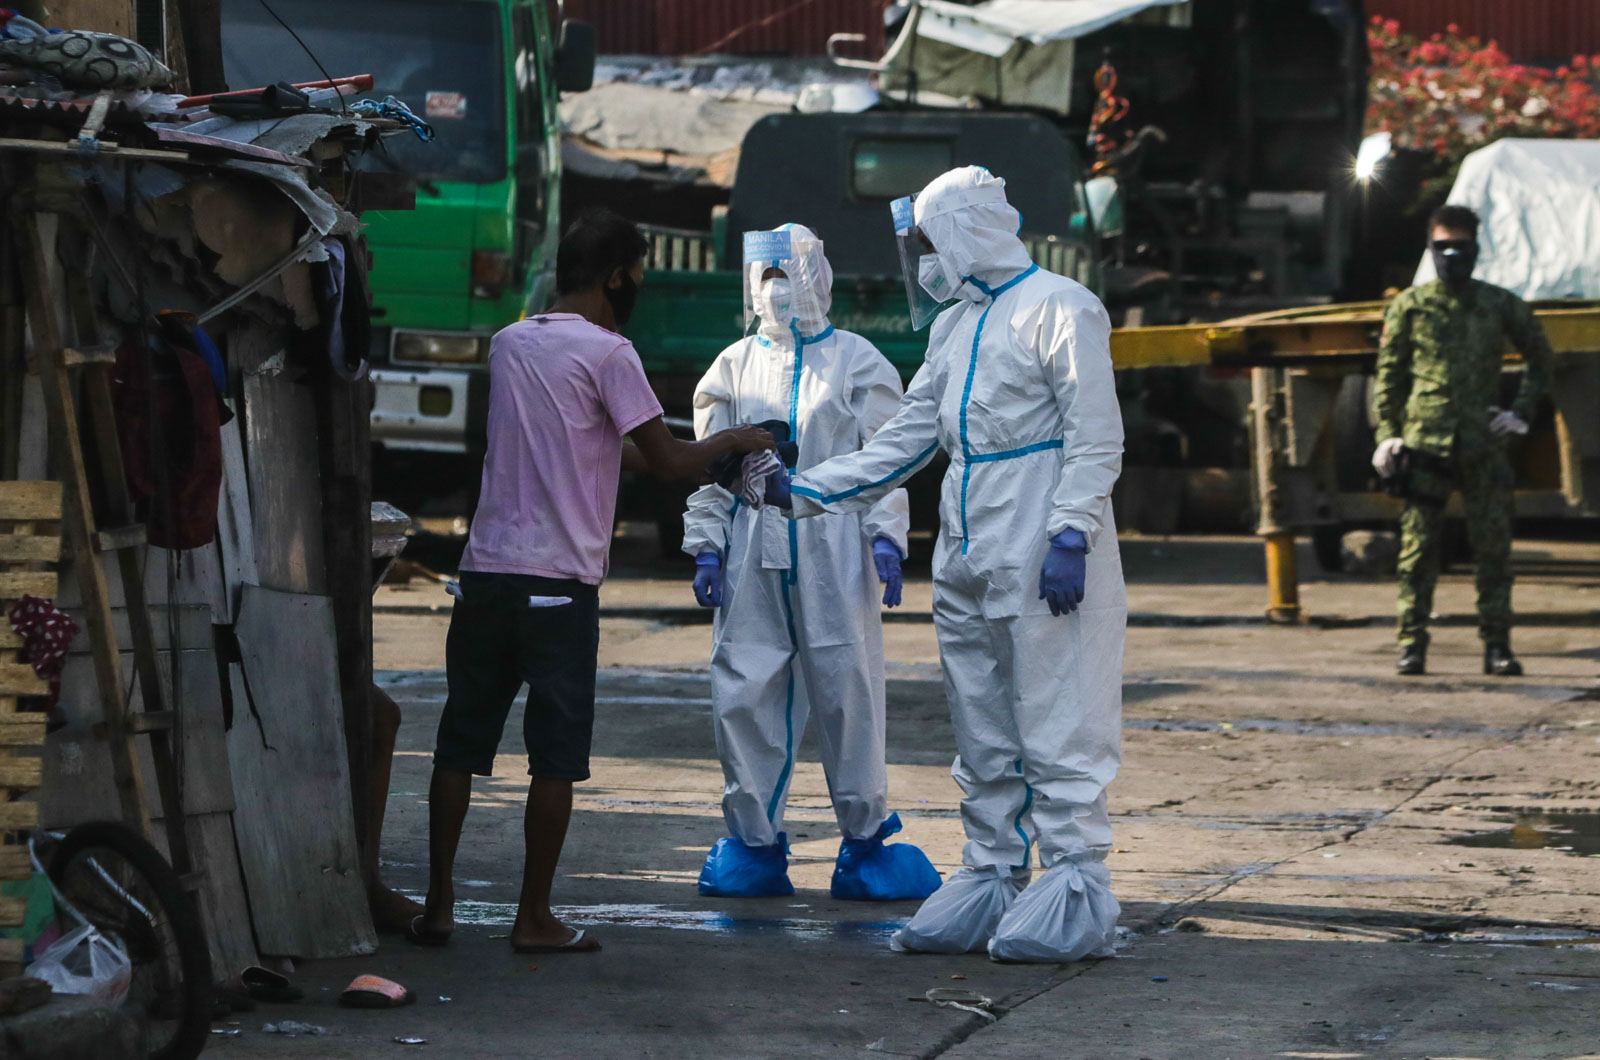 CURBING THE VIRUS. Health workers prepare to bring a person suspected of having coronavirus to a quarantine facility in Tondo. Photo by KD Madrilejos/Rappler 